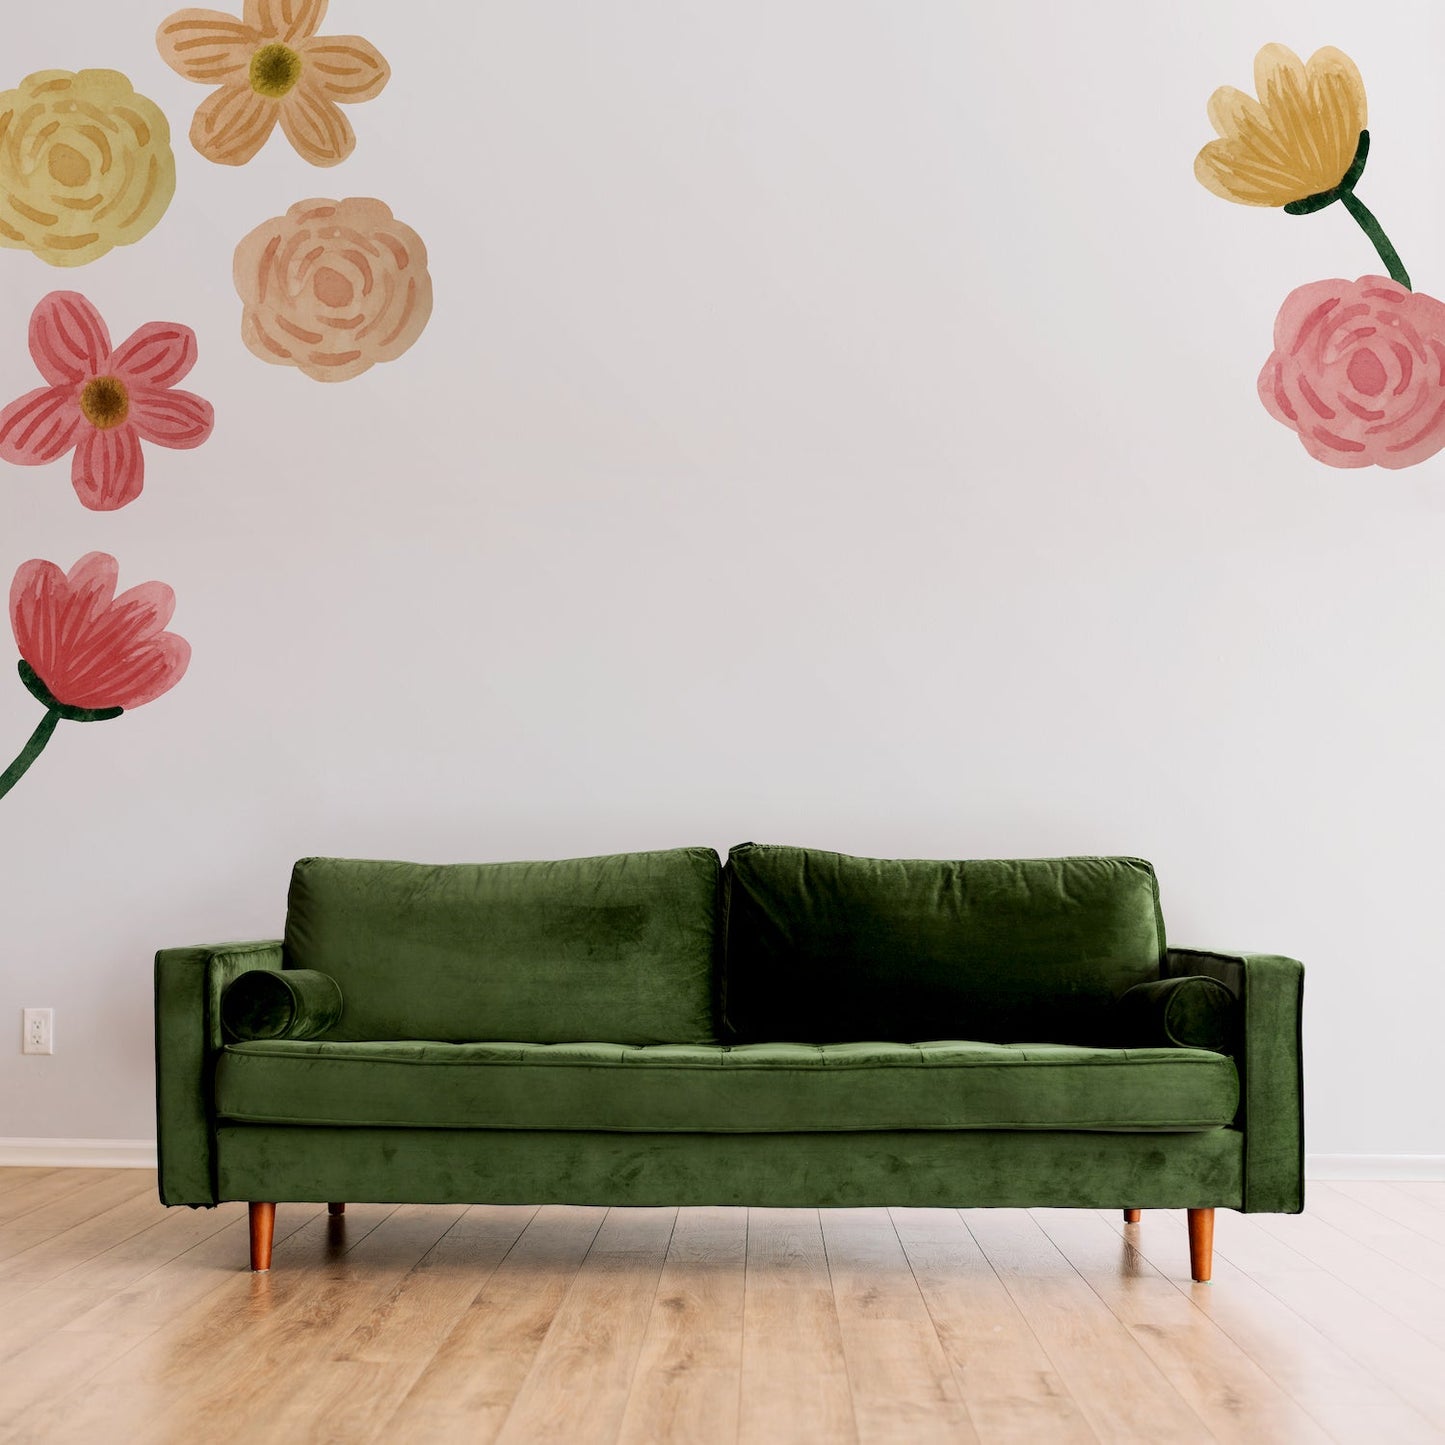 Blossom Flowers Wall Decals